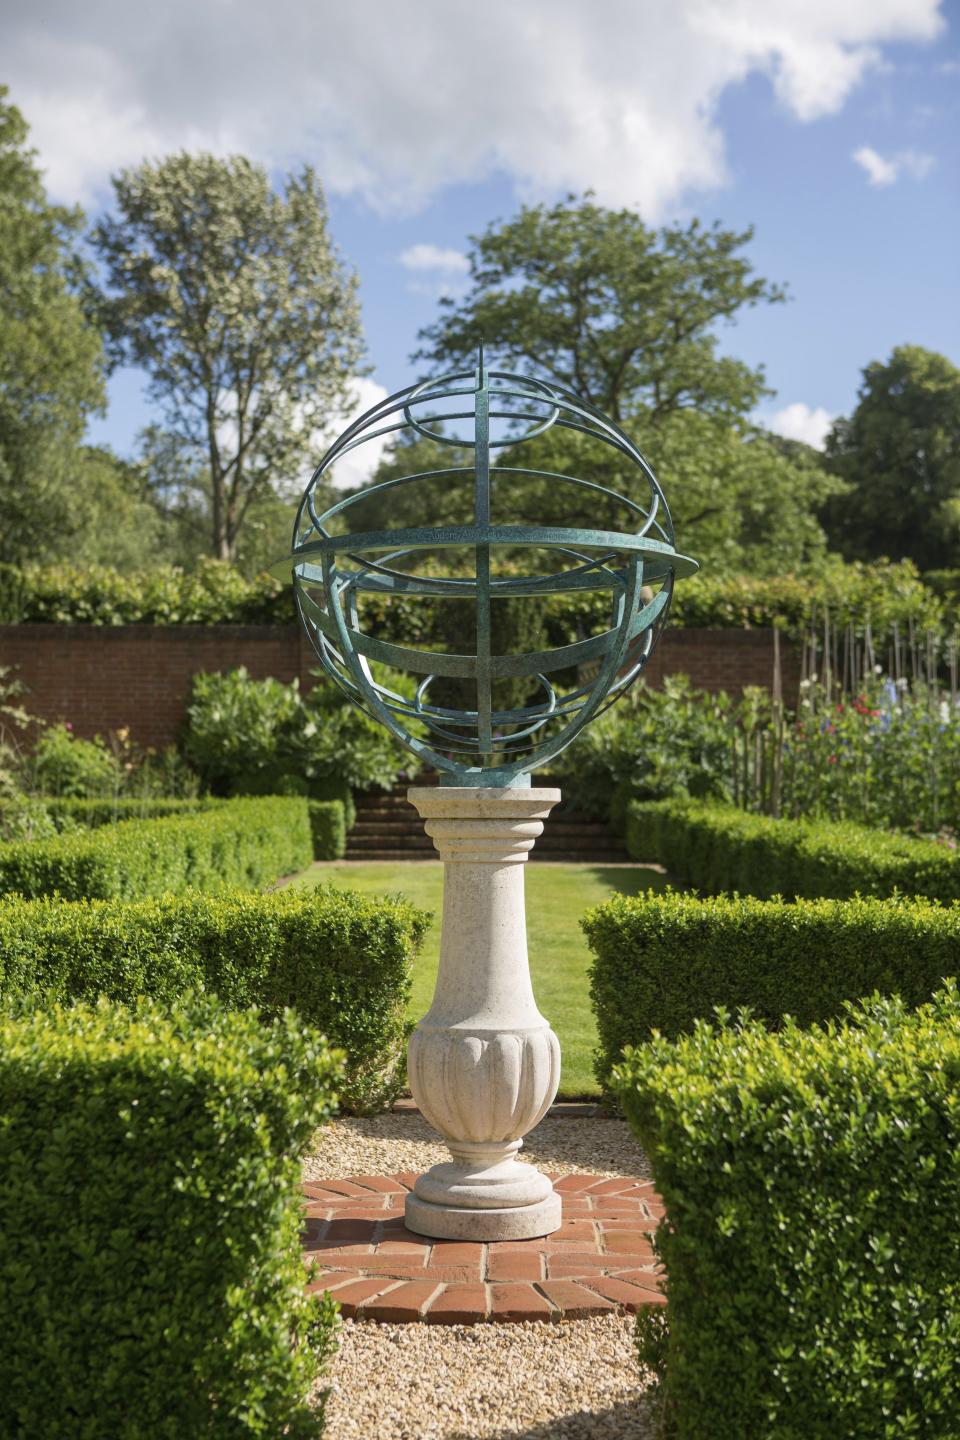 This photo shows one of British designer David Harber's armillary spheres. Harber began his storied career creating armillary spheres, like the one shown here, and he still loves creating them. Homeowners can order the bronze, steel or brass spheres etched with favorite quotes, names, home coordinates or other bespoke engravings. (Clive Nichols/David Harper via AP)